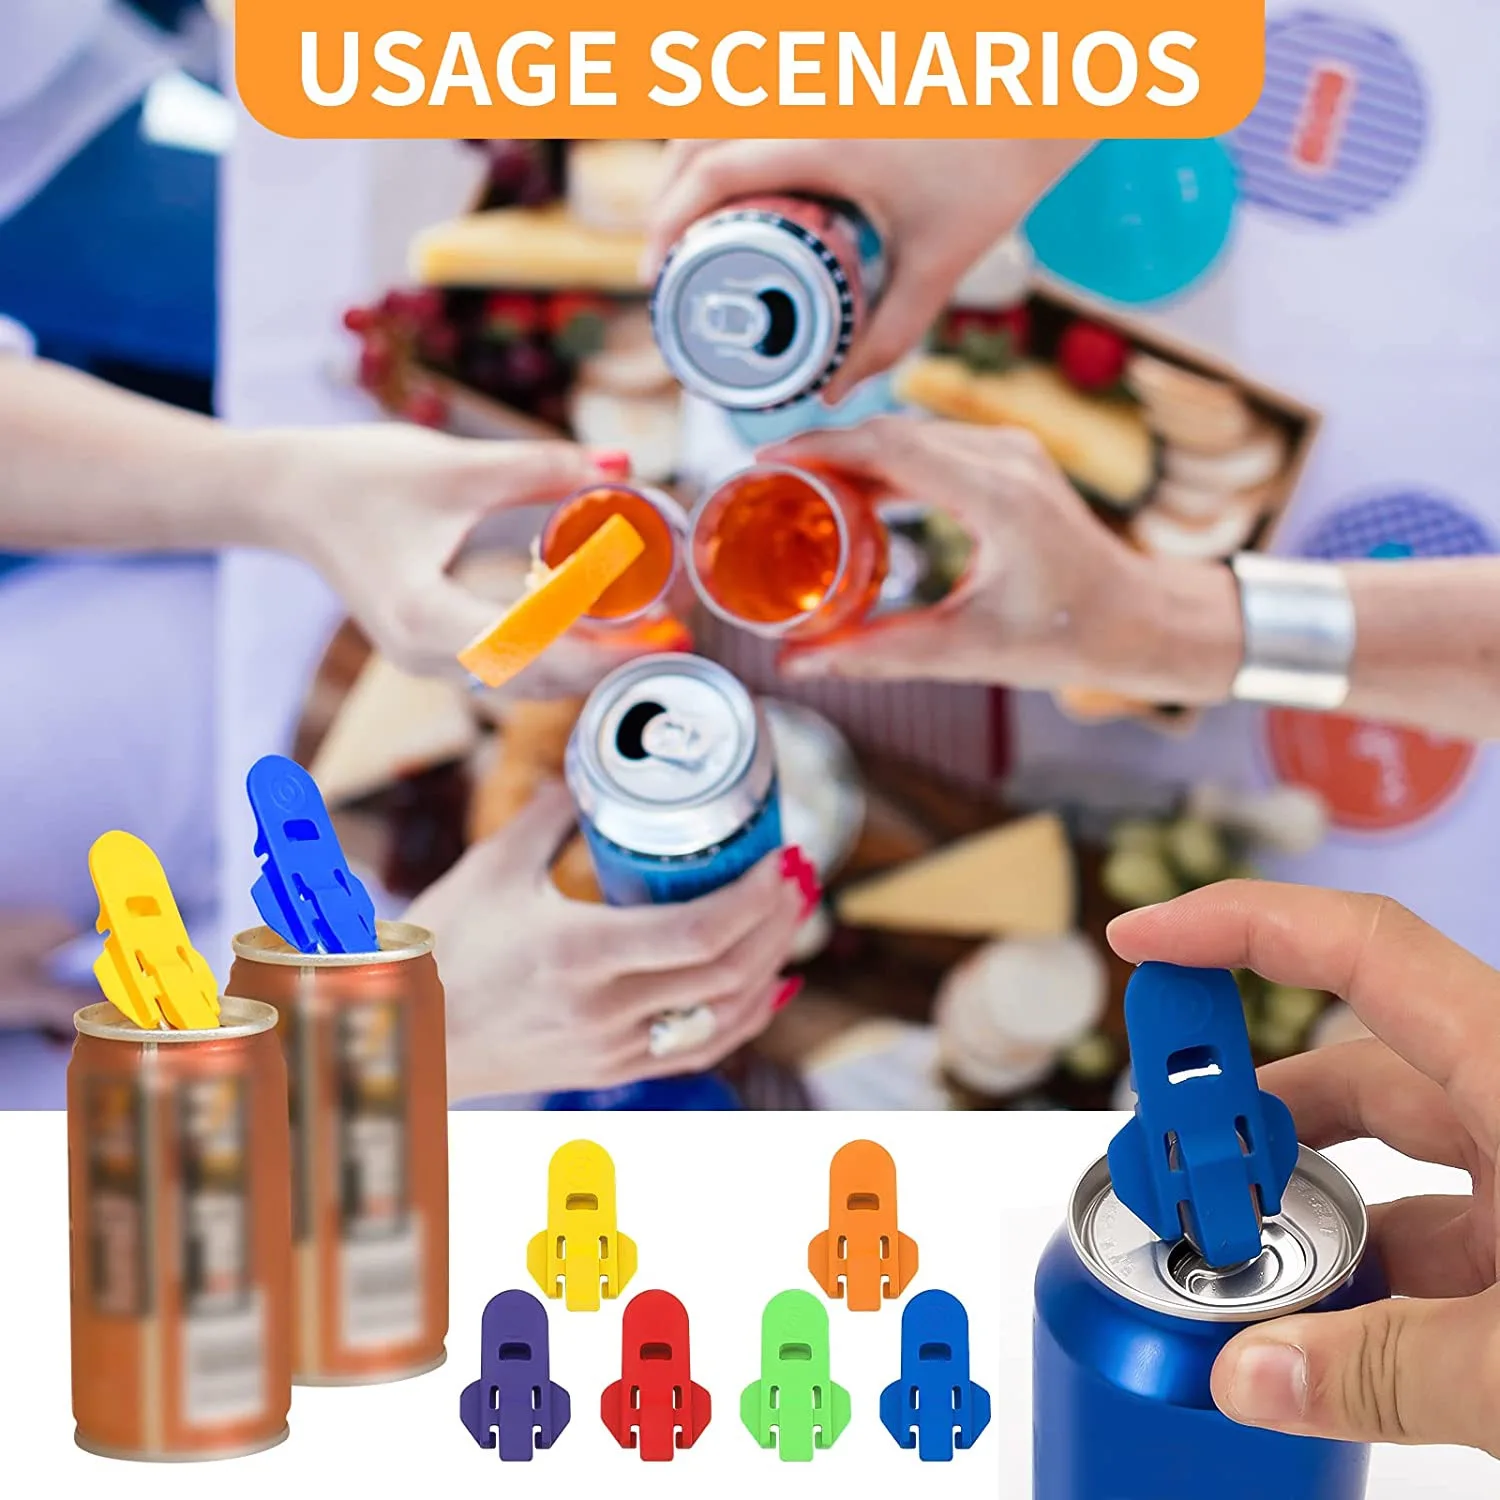 

6PCS Pack Easy Can Opener Plastic Beverage Drink Barricade Cover Random Color Easy To Use Kitchen Tools